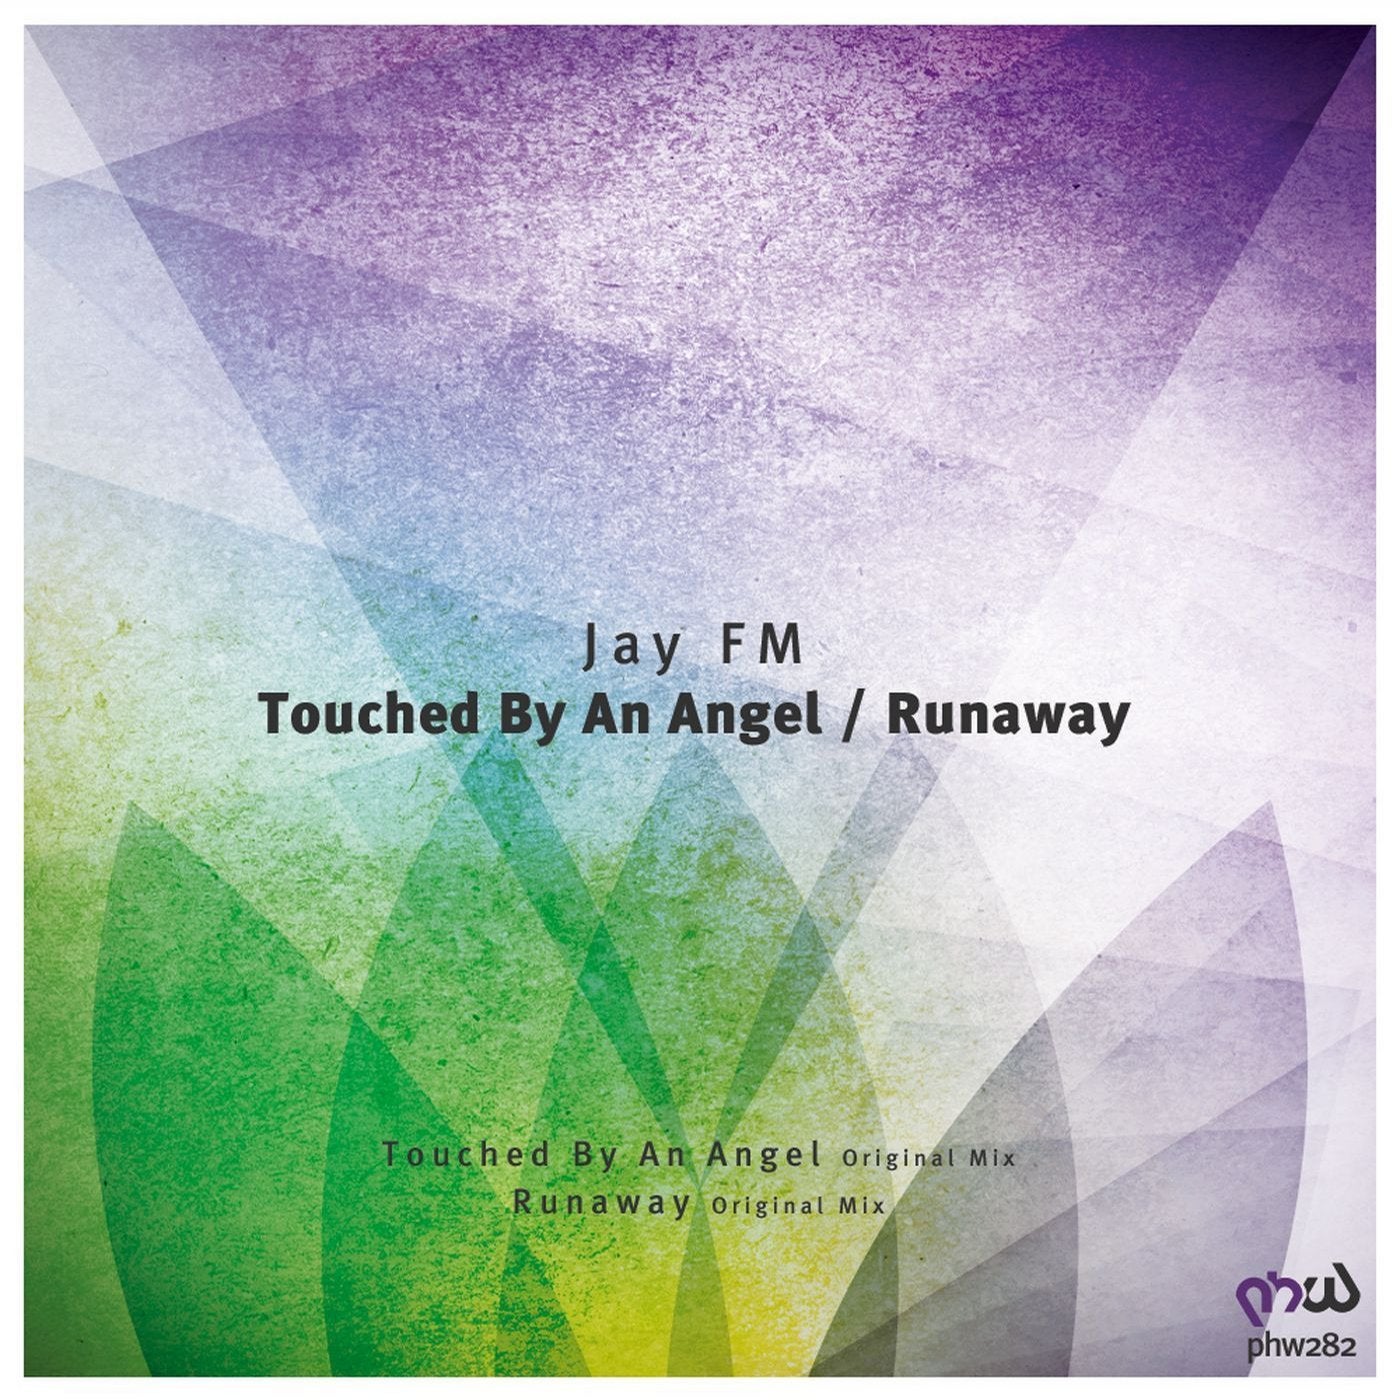 Touched by an Angel / Runaway